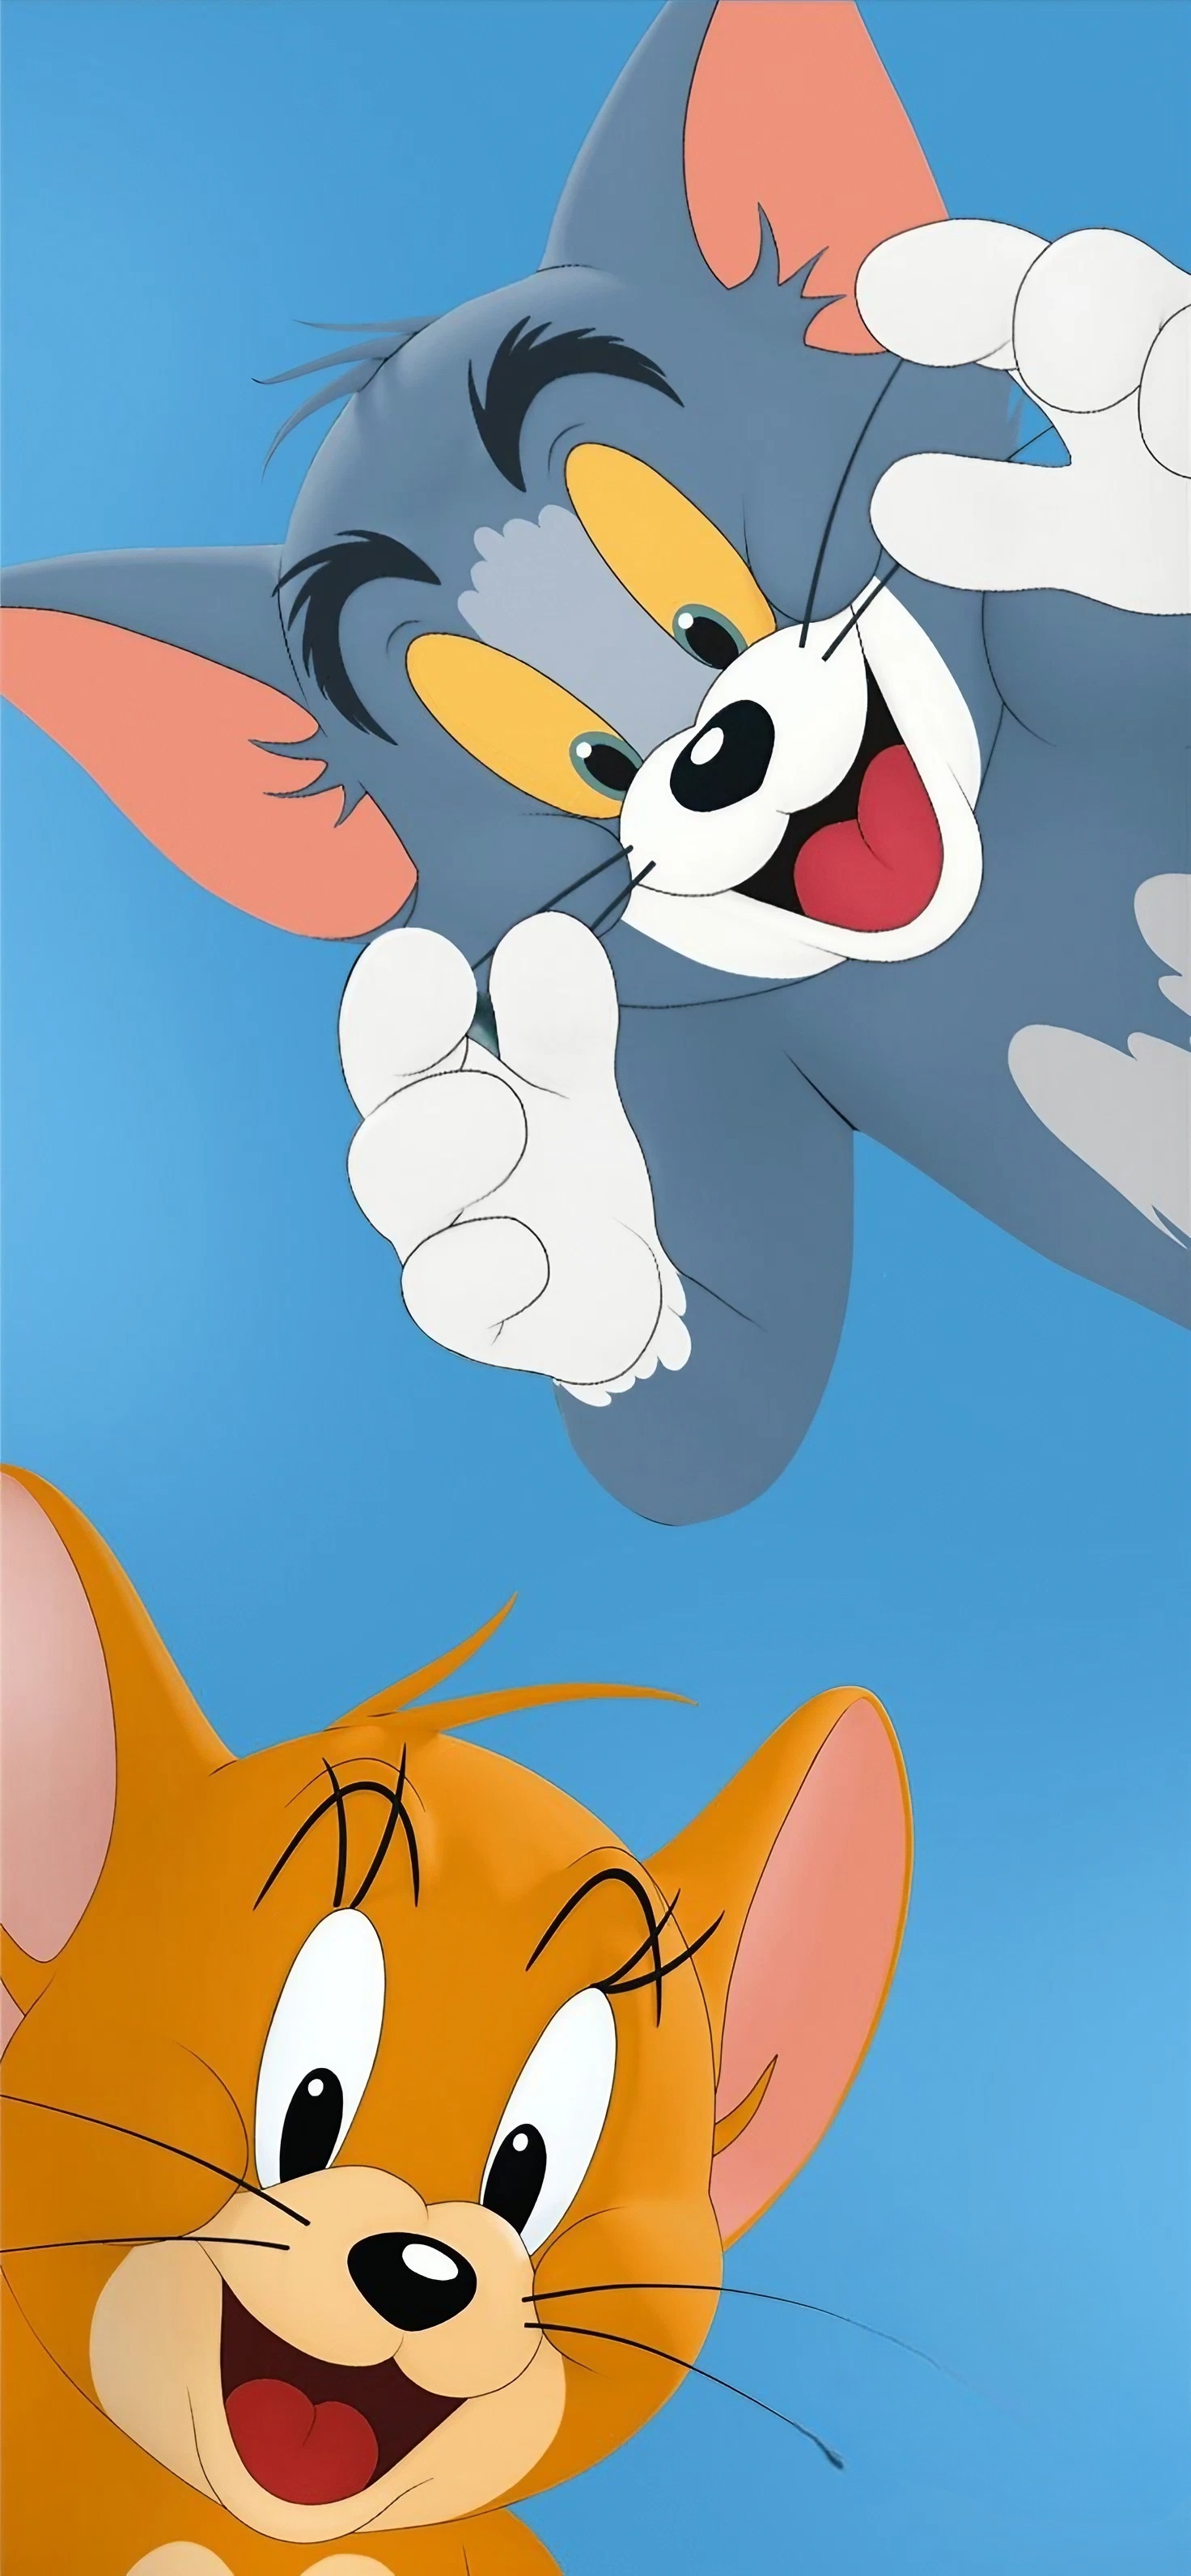 Tom & Jerry Wallpapers and Backgrounds - WallpaperCG